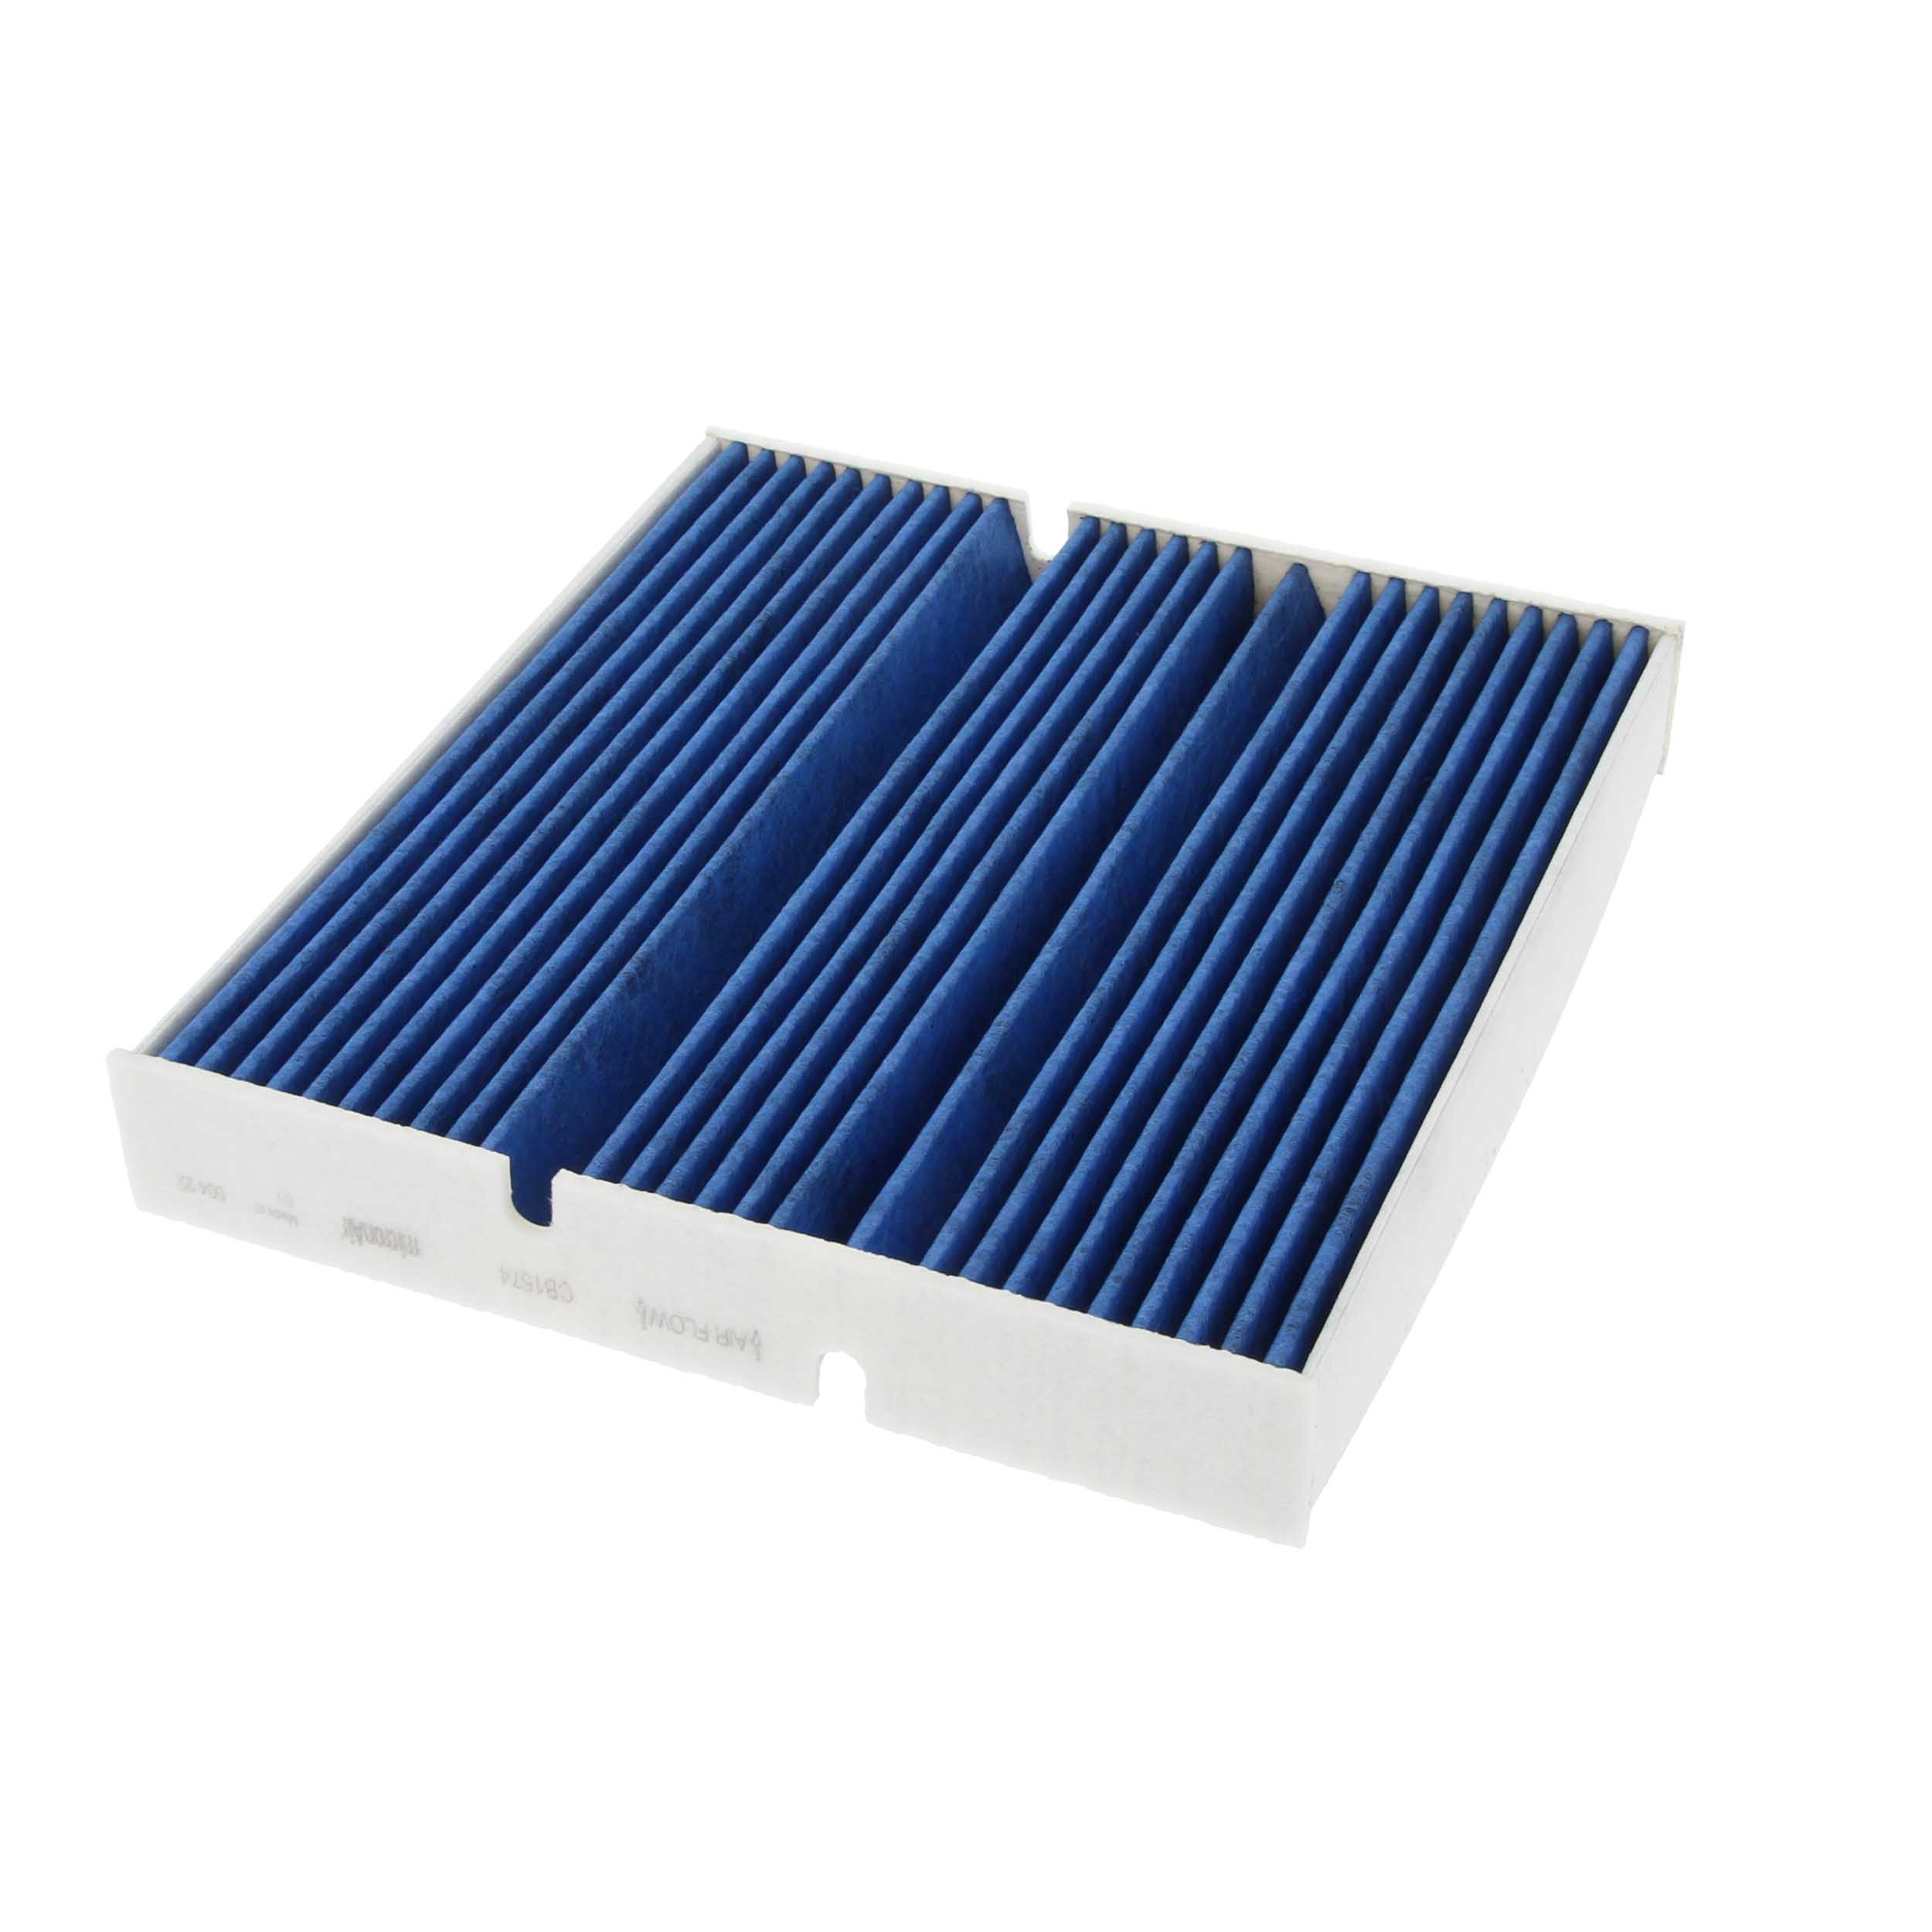 CB1571 CORTECO with anti-allergic effect, Particulate filter (PM 2.5), with antibacterial action, with fungicidal effect, 256 mm x 231 mm x 39 mm Width: 231mm, Height: 39mm, Length: 256mm Cabin filter 49457425 buy